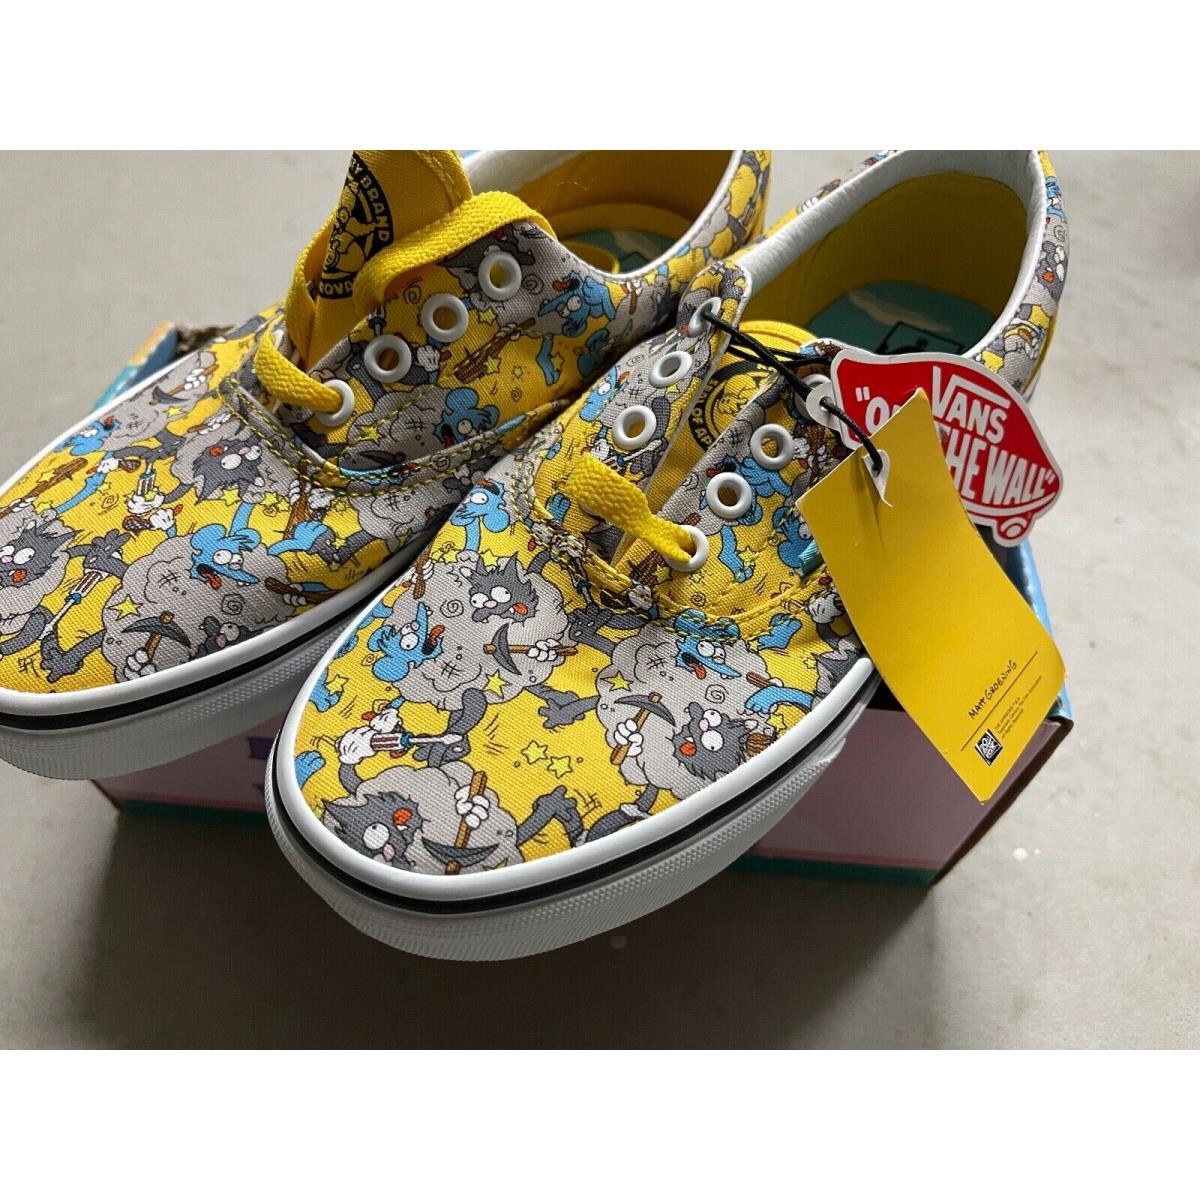 Vans x Simpsons Era Sneakers Itchy and Scratchy Skating Shoes Size 4.5